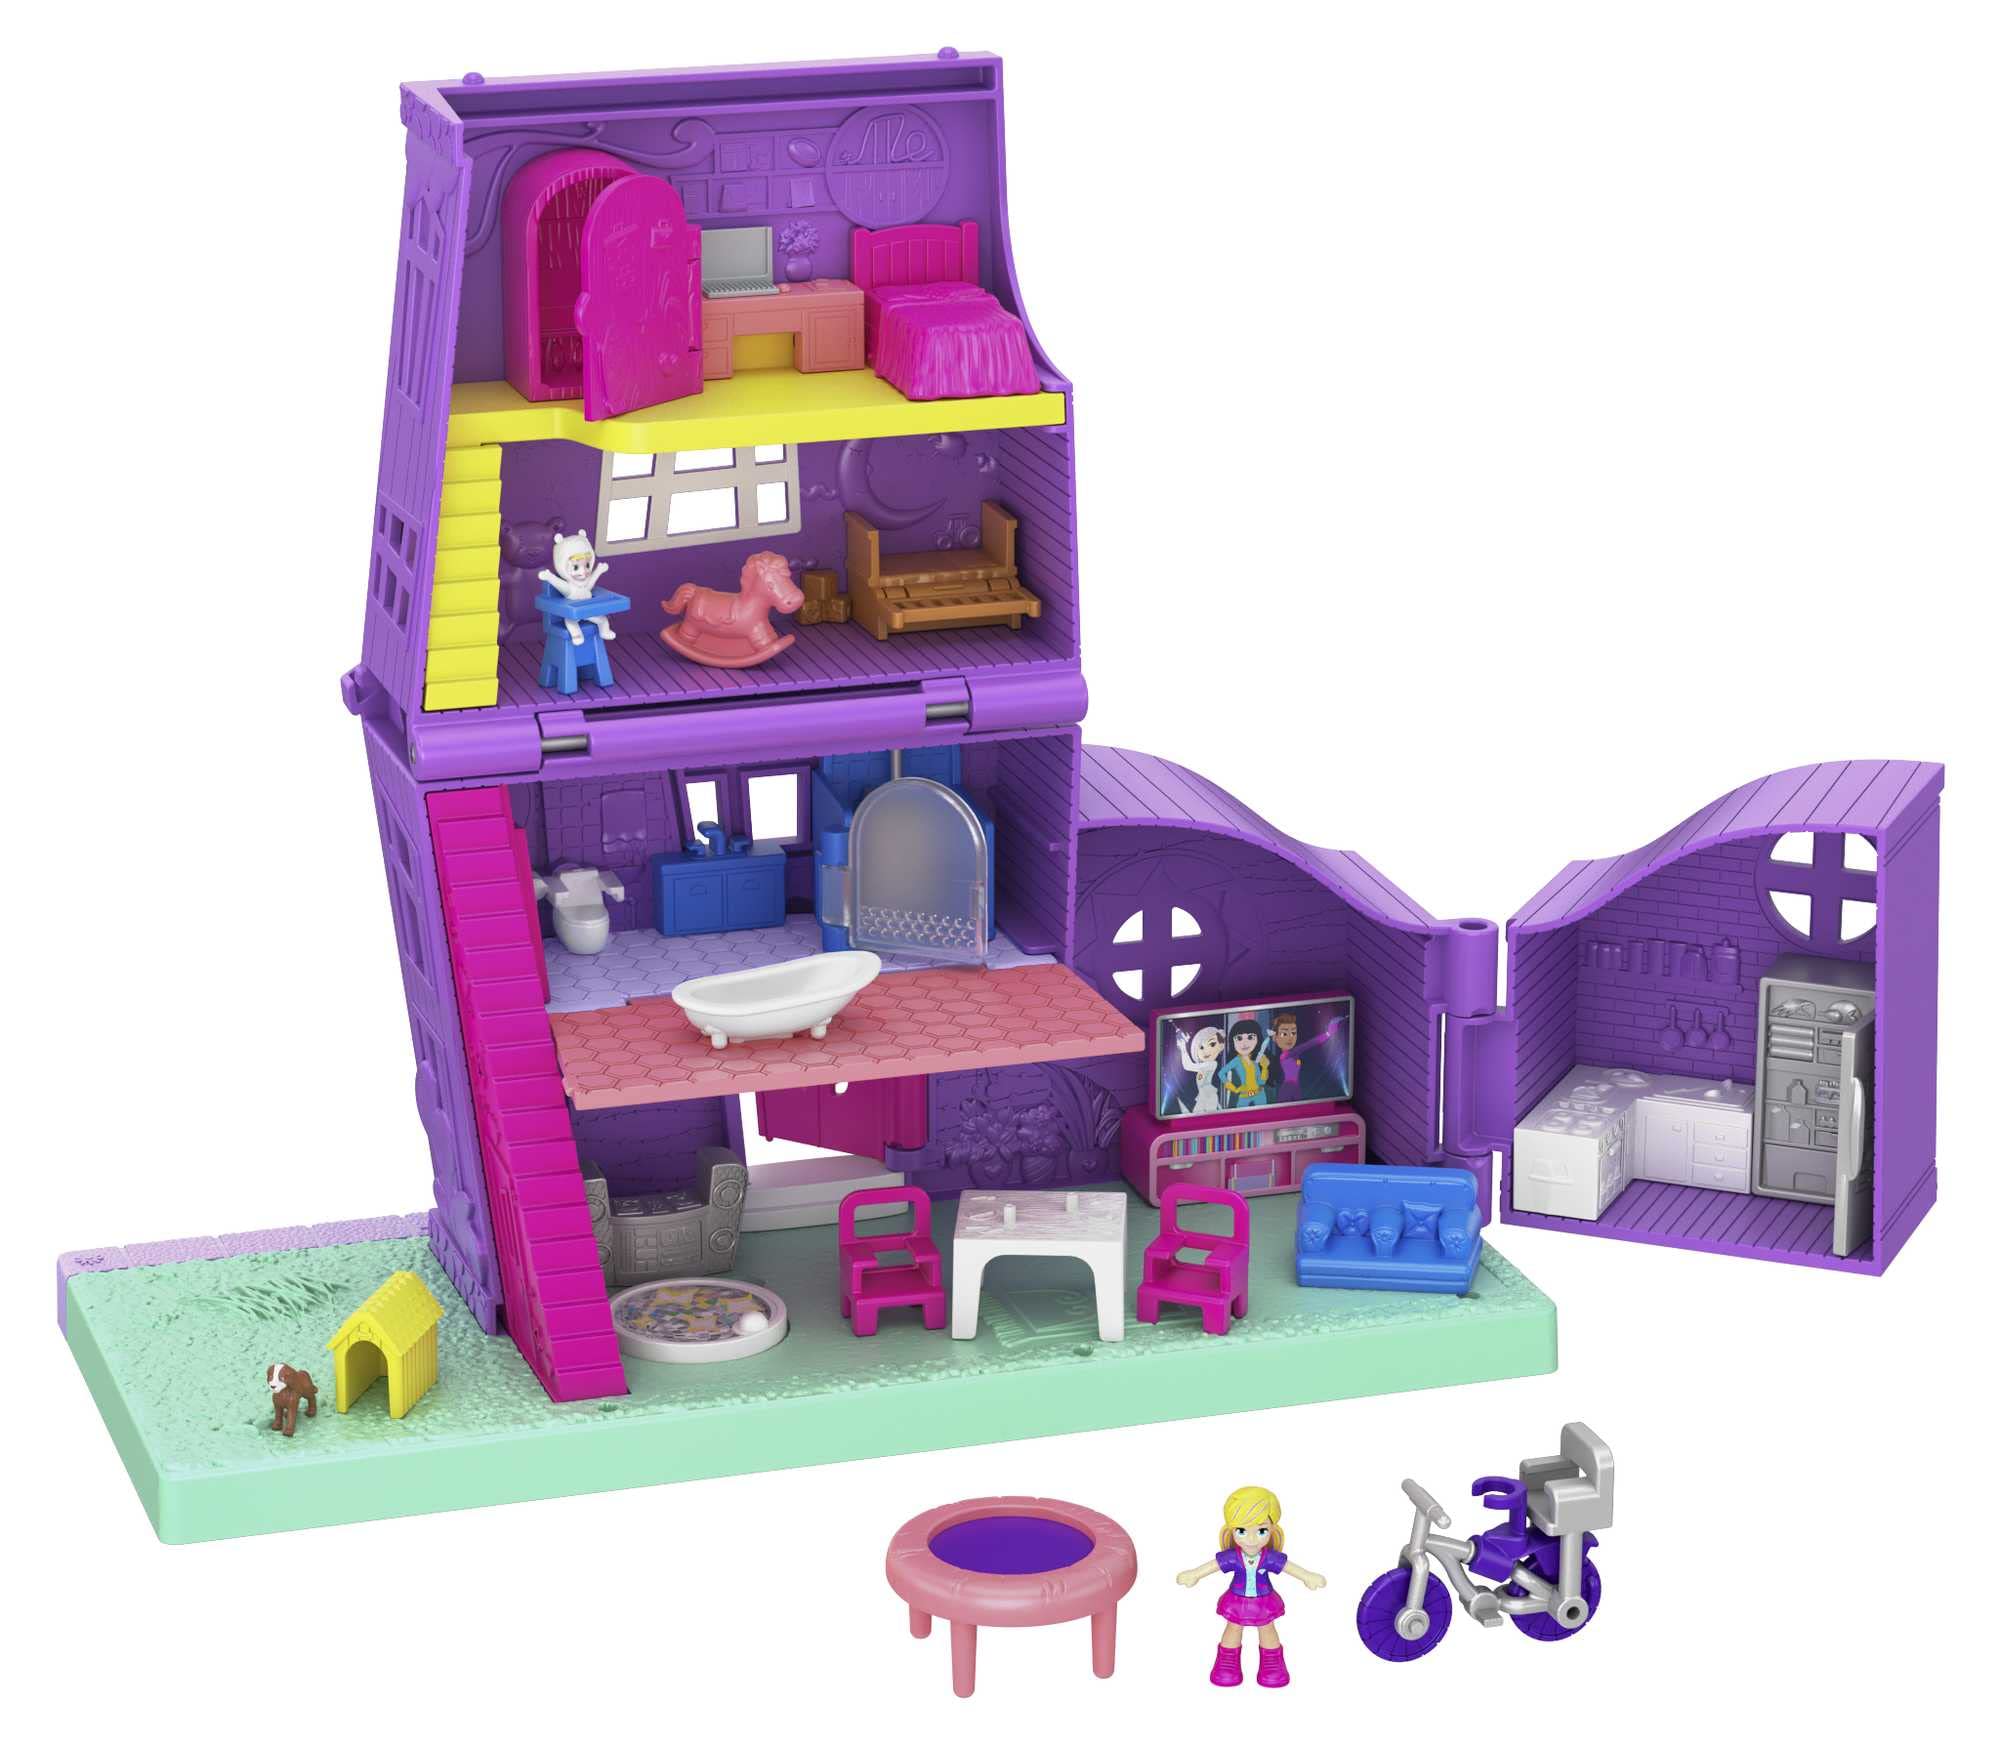 Amazon.com: Polly Pocket Doll House with Micro Doll, Toy Bike & Furniture Accessories, Transforming Pollyville Pocket House Playset : Toys & Games $13.76